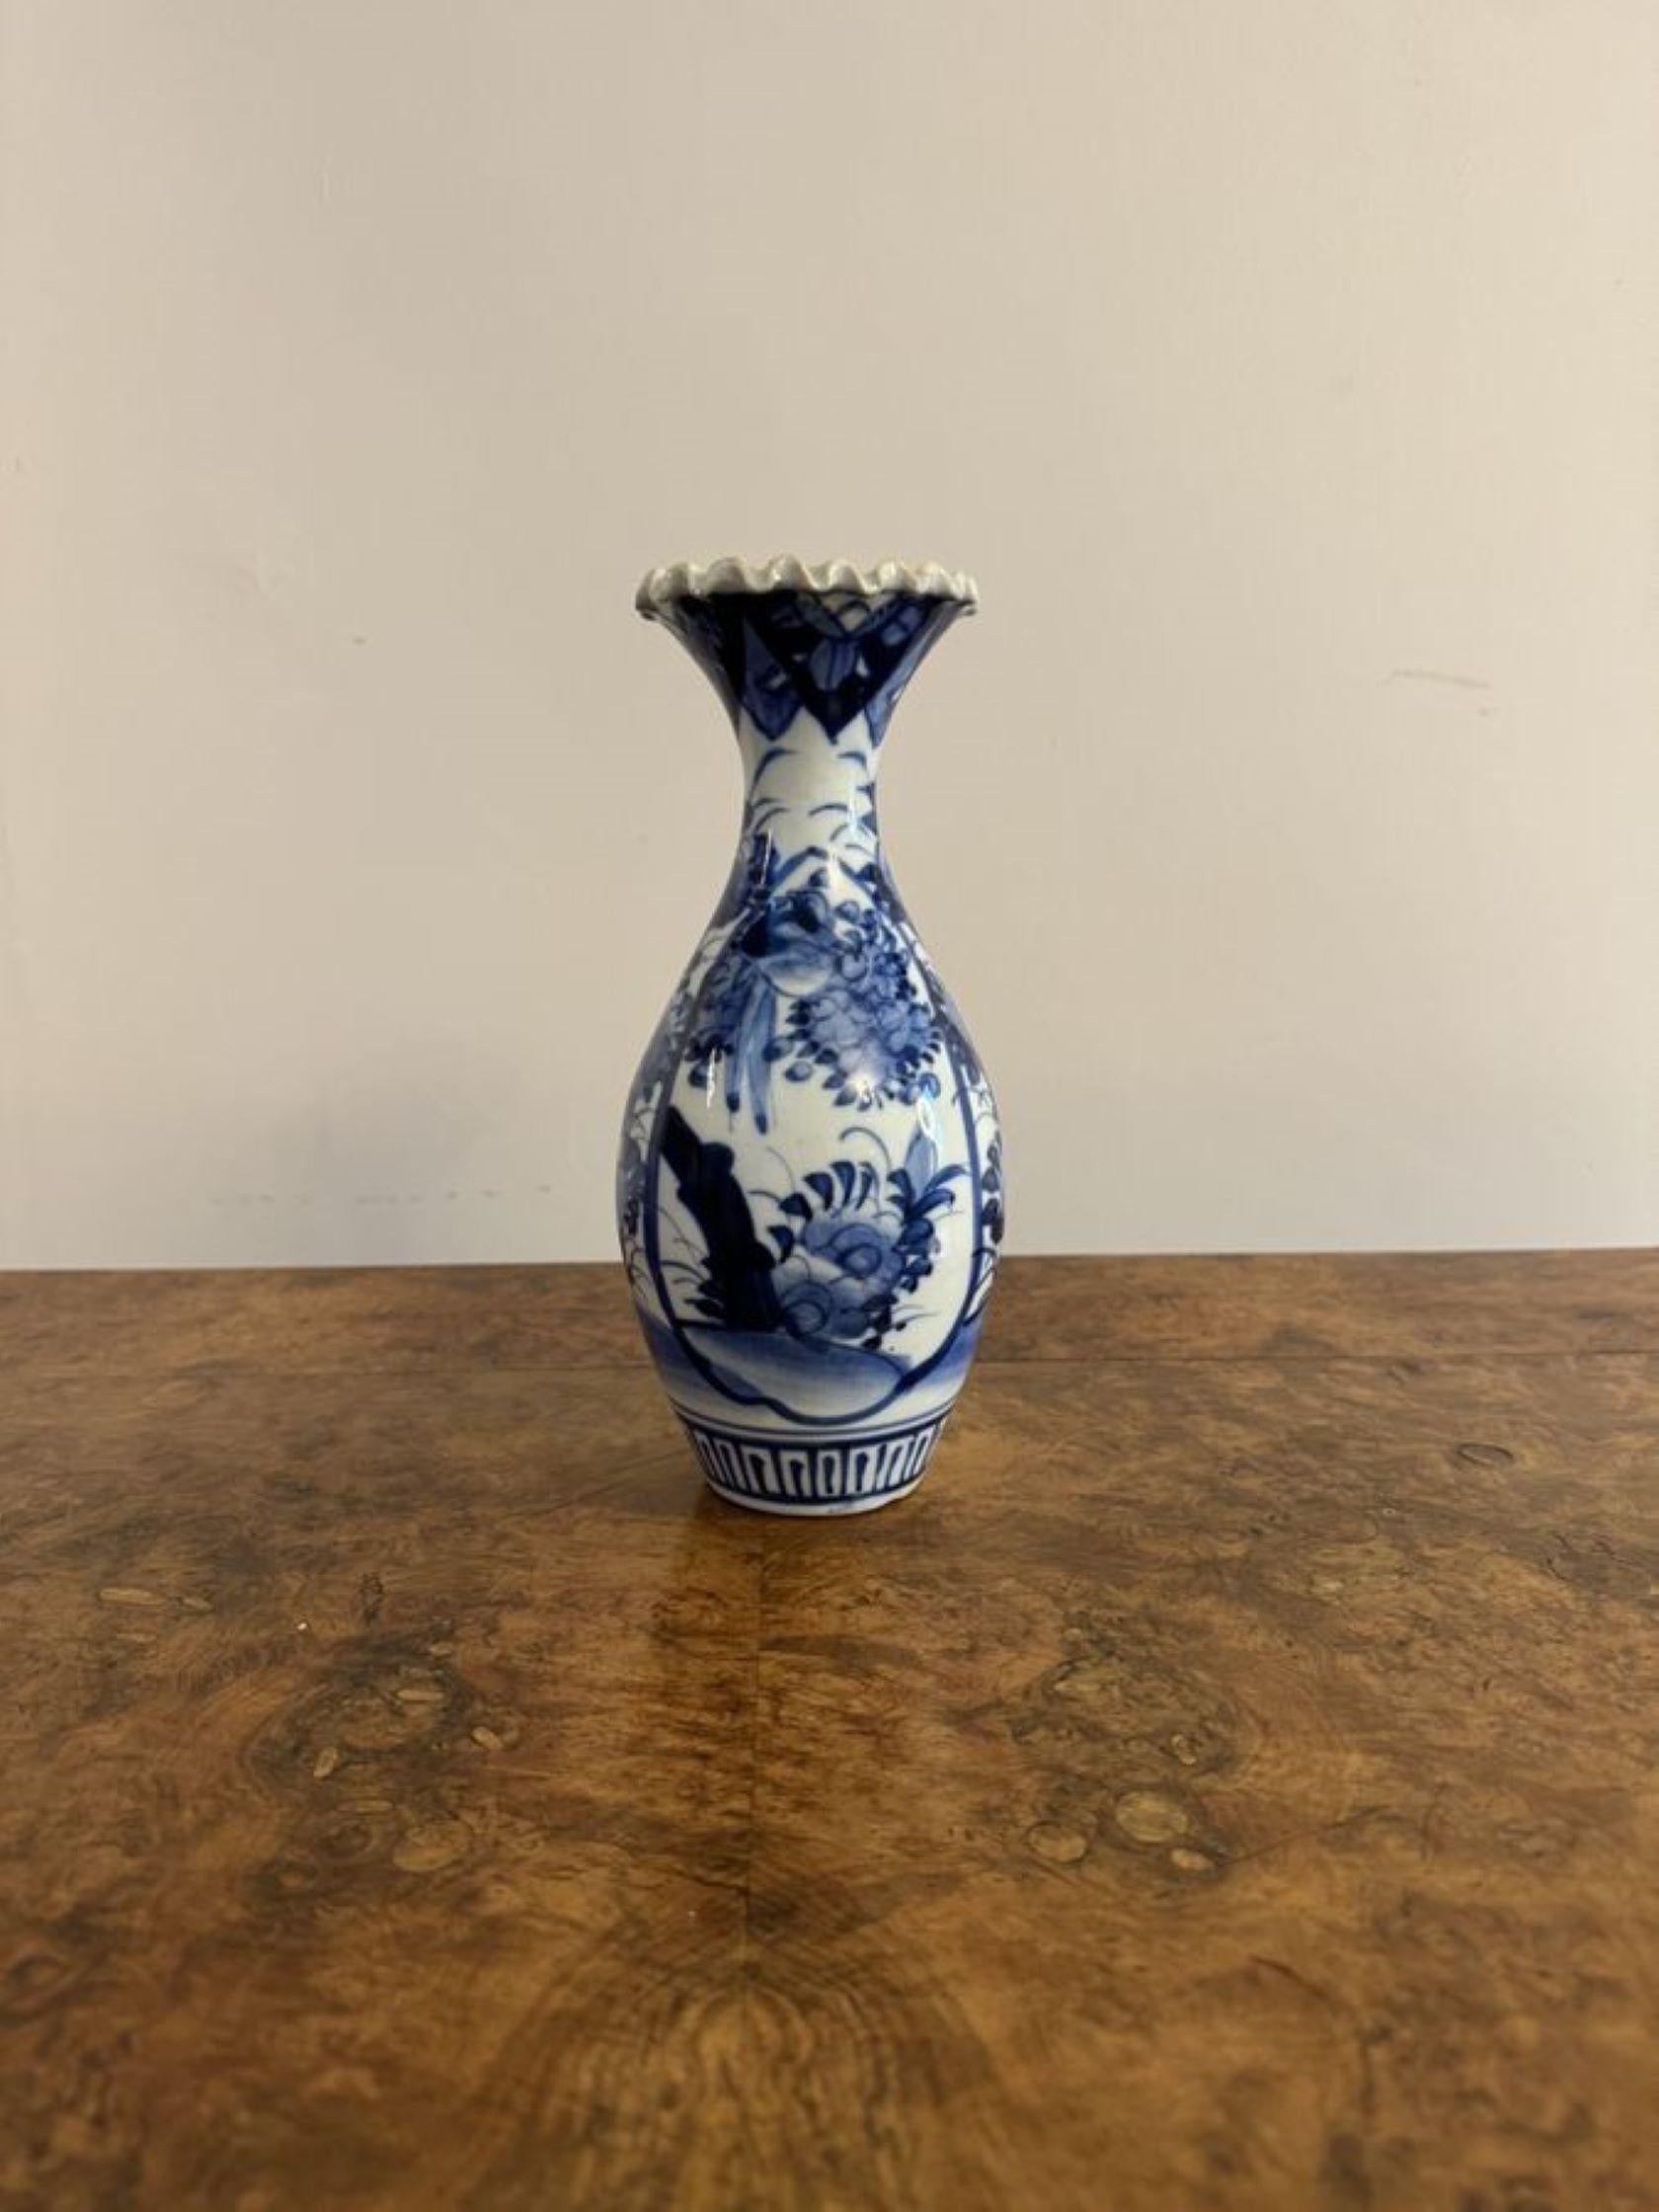 Charming quality antique Japanese imari blue and white baluster vase having a charming quality antique Japanese imari blue and white baluster vase hand painted in stunning blue and white colours decorated with flowers in blue on a white ground with